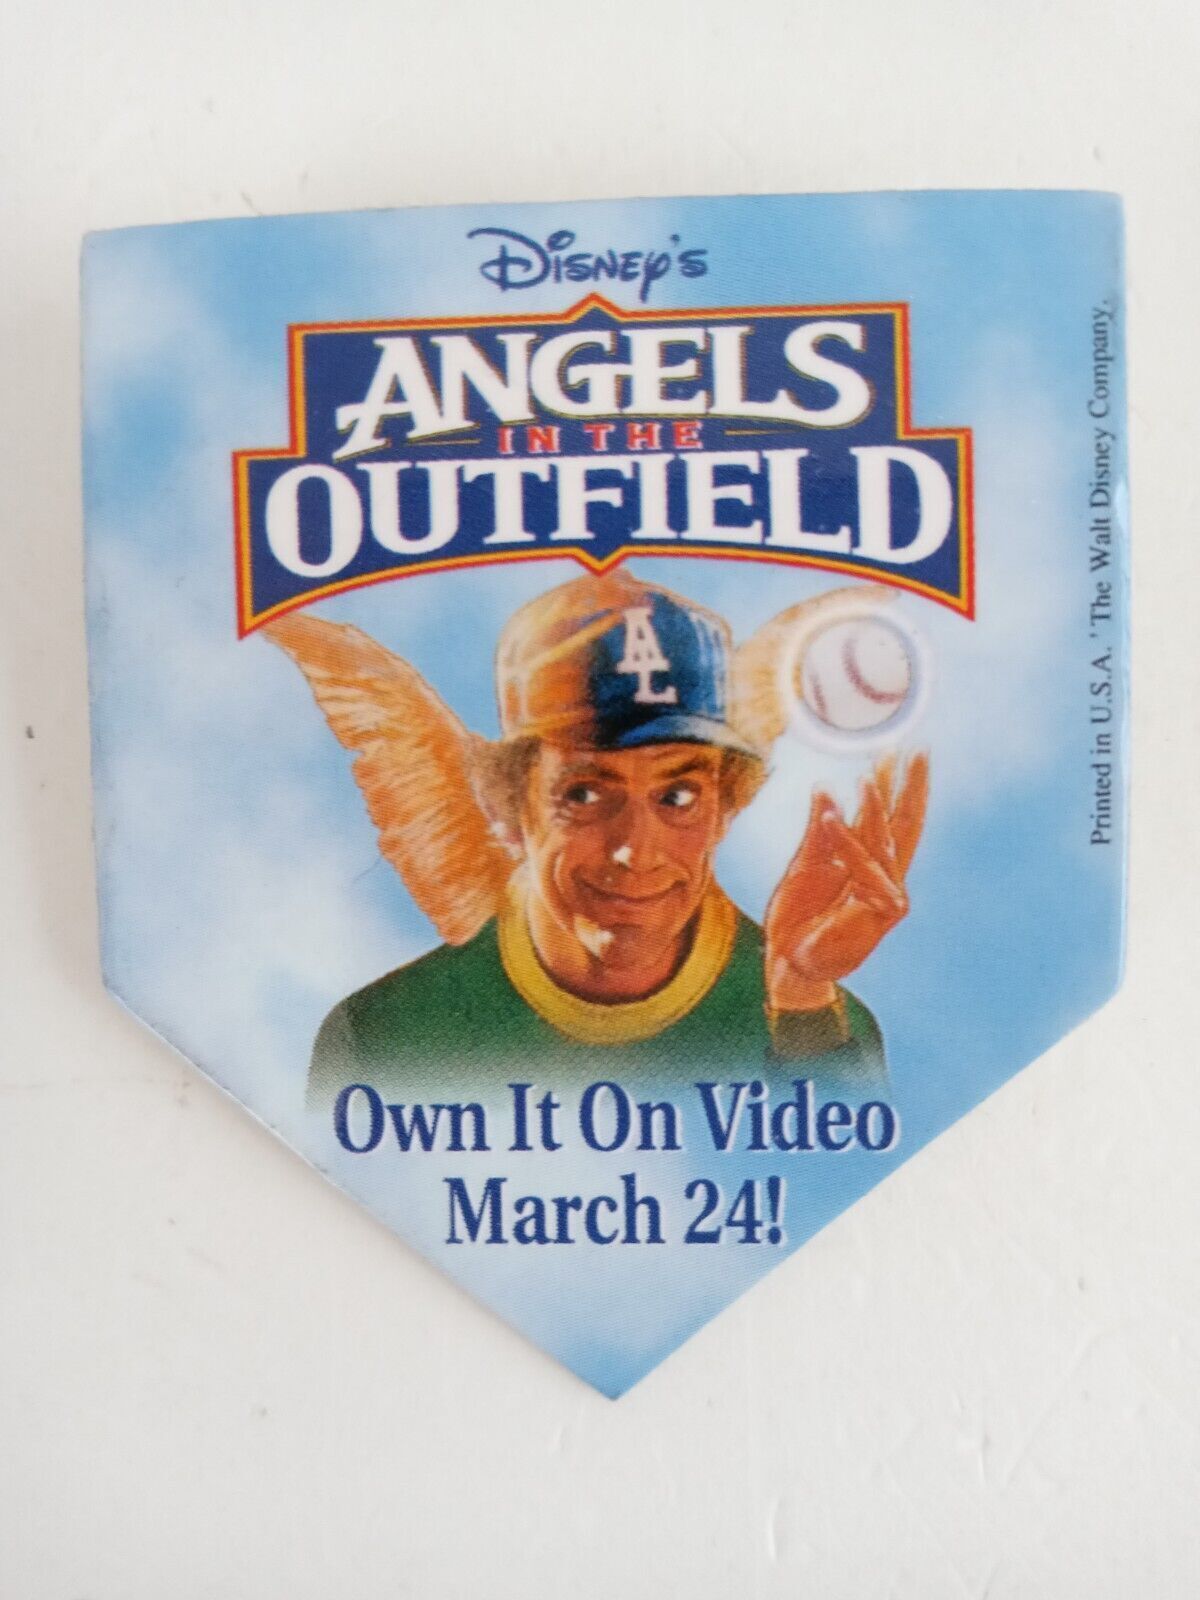 Primary image for Disney's Angels In The Outfield VHS Movie Promo Pin Button